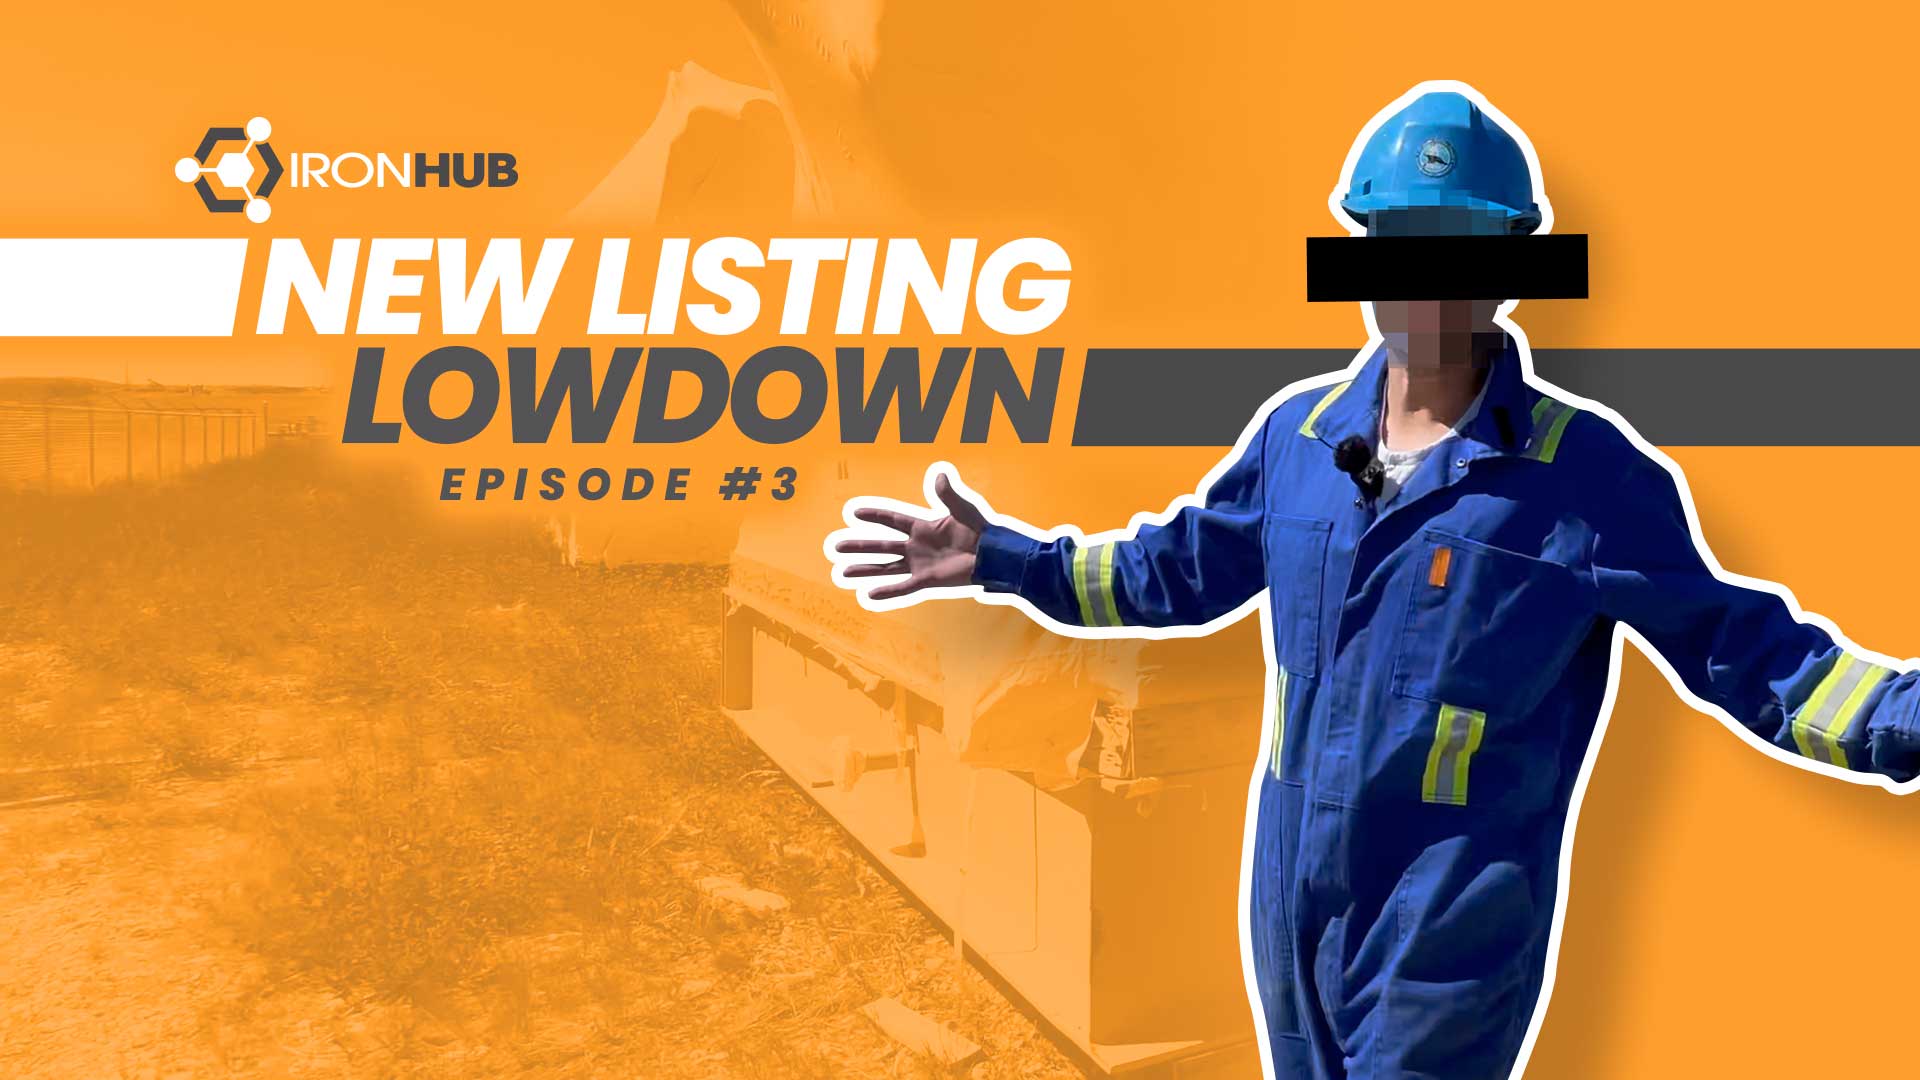 Episode #3 of IronHub New Listing Lowdown is Now Out! Brand New Ssrplus Gas Processing Equipment For Sale in Alberta, Canada